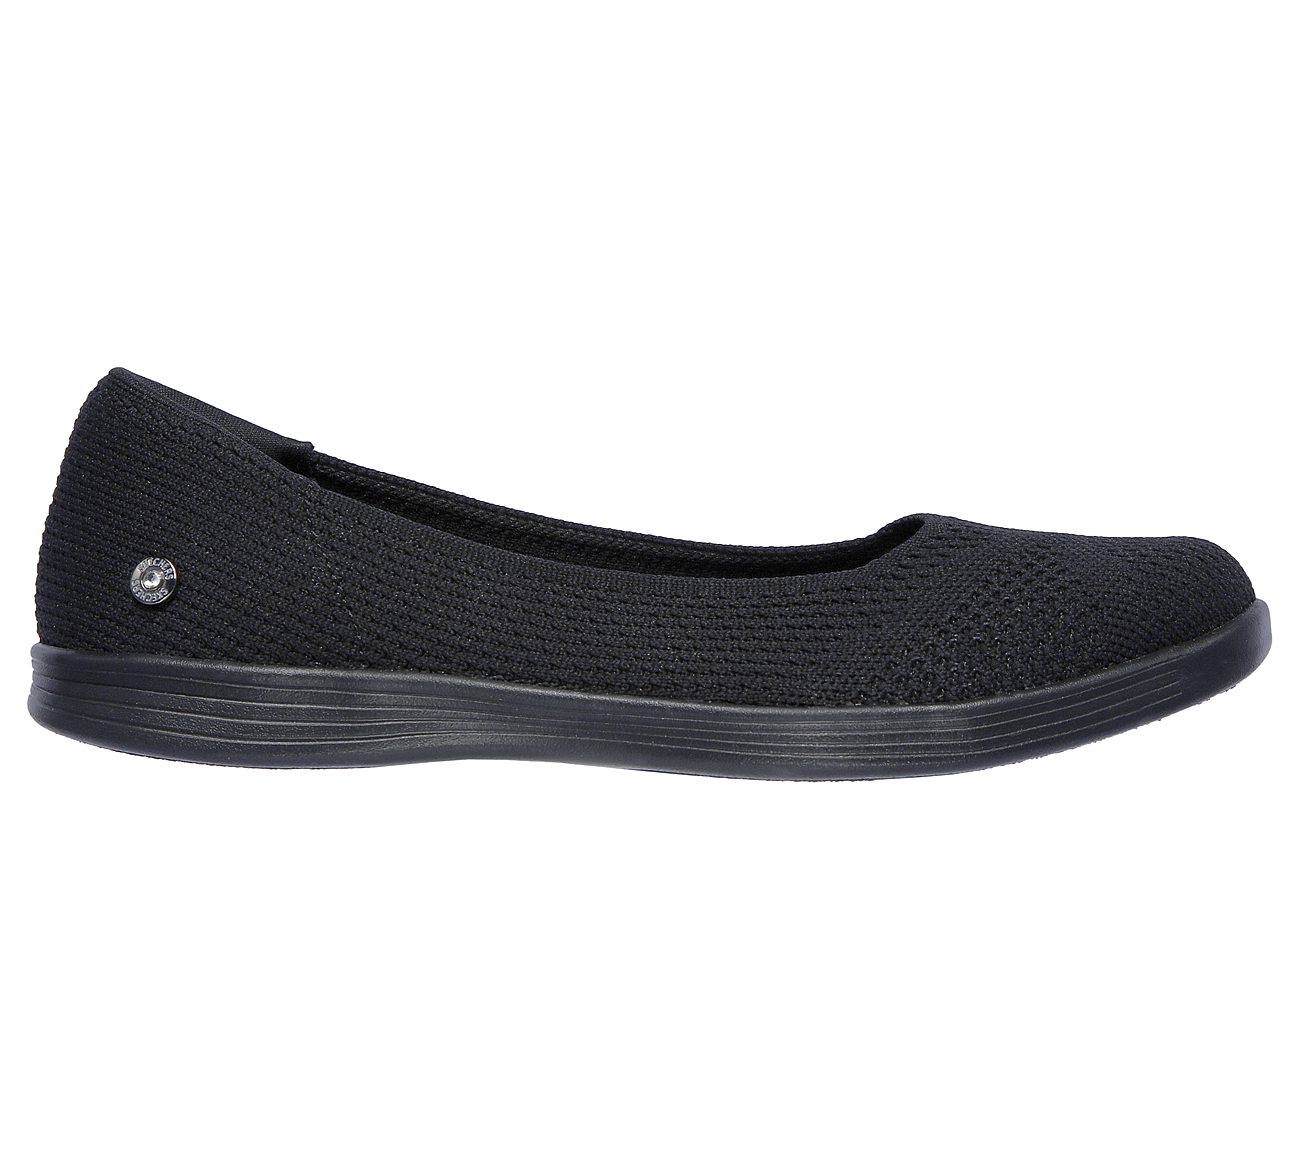 Buy SKECHERS Skechers On the GO Dreamy - Lily Skechers Performance Shoes